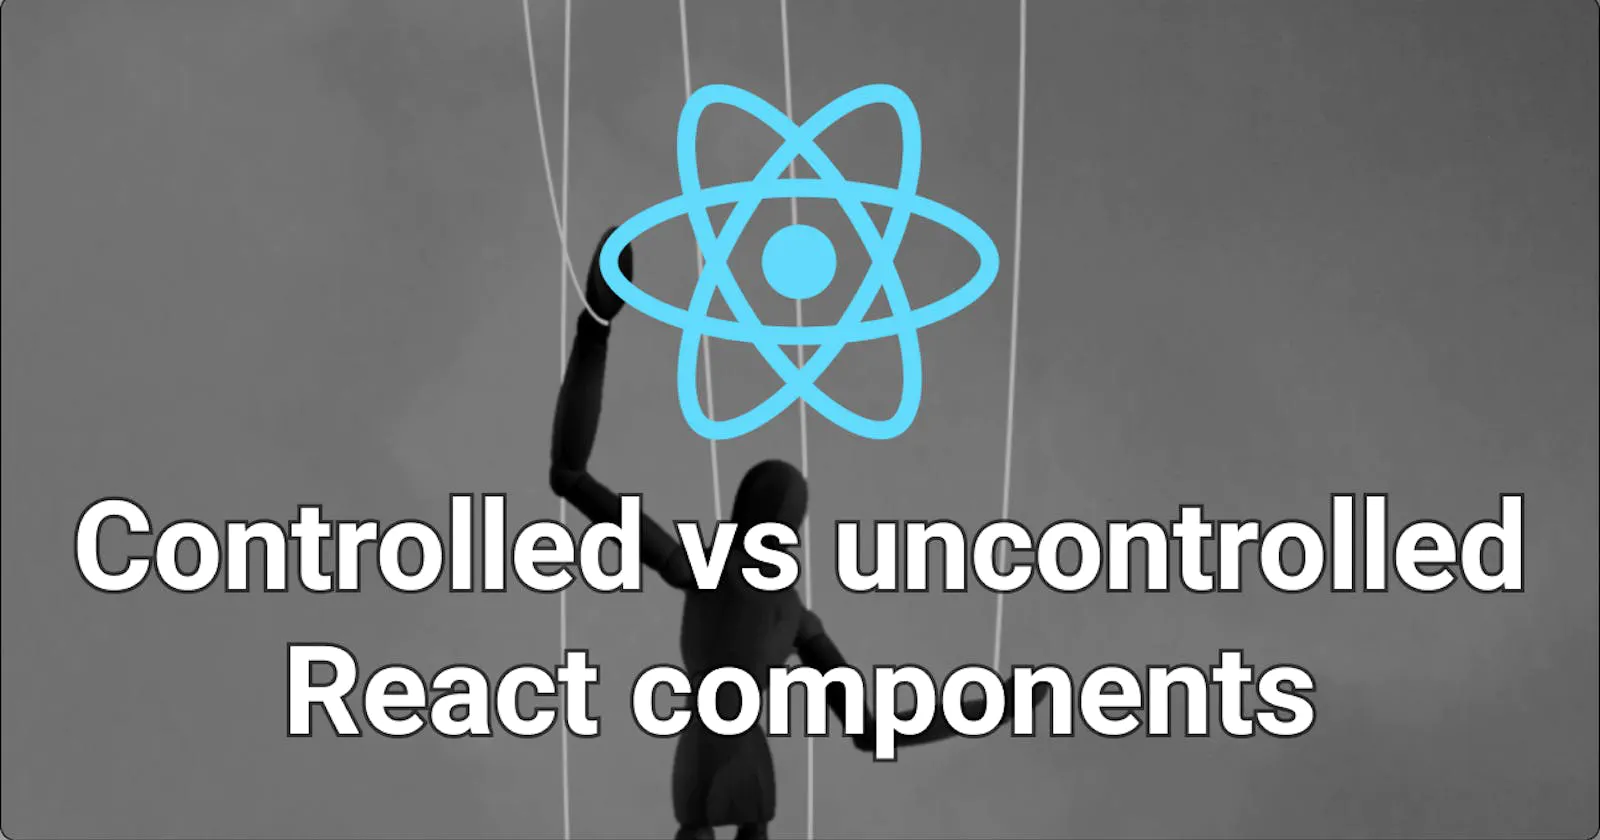 Controlled vs uncontrolled React components - why not both?